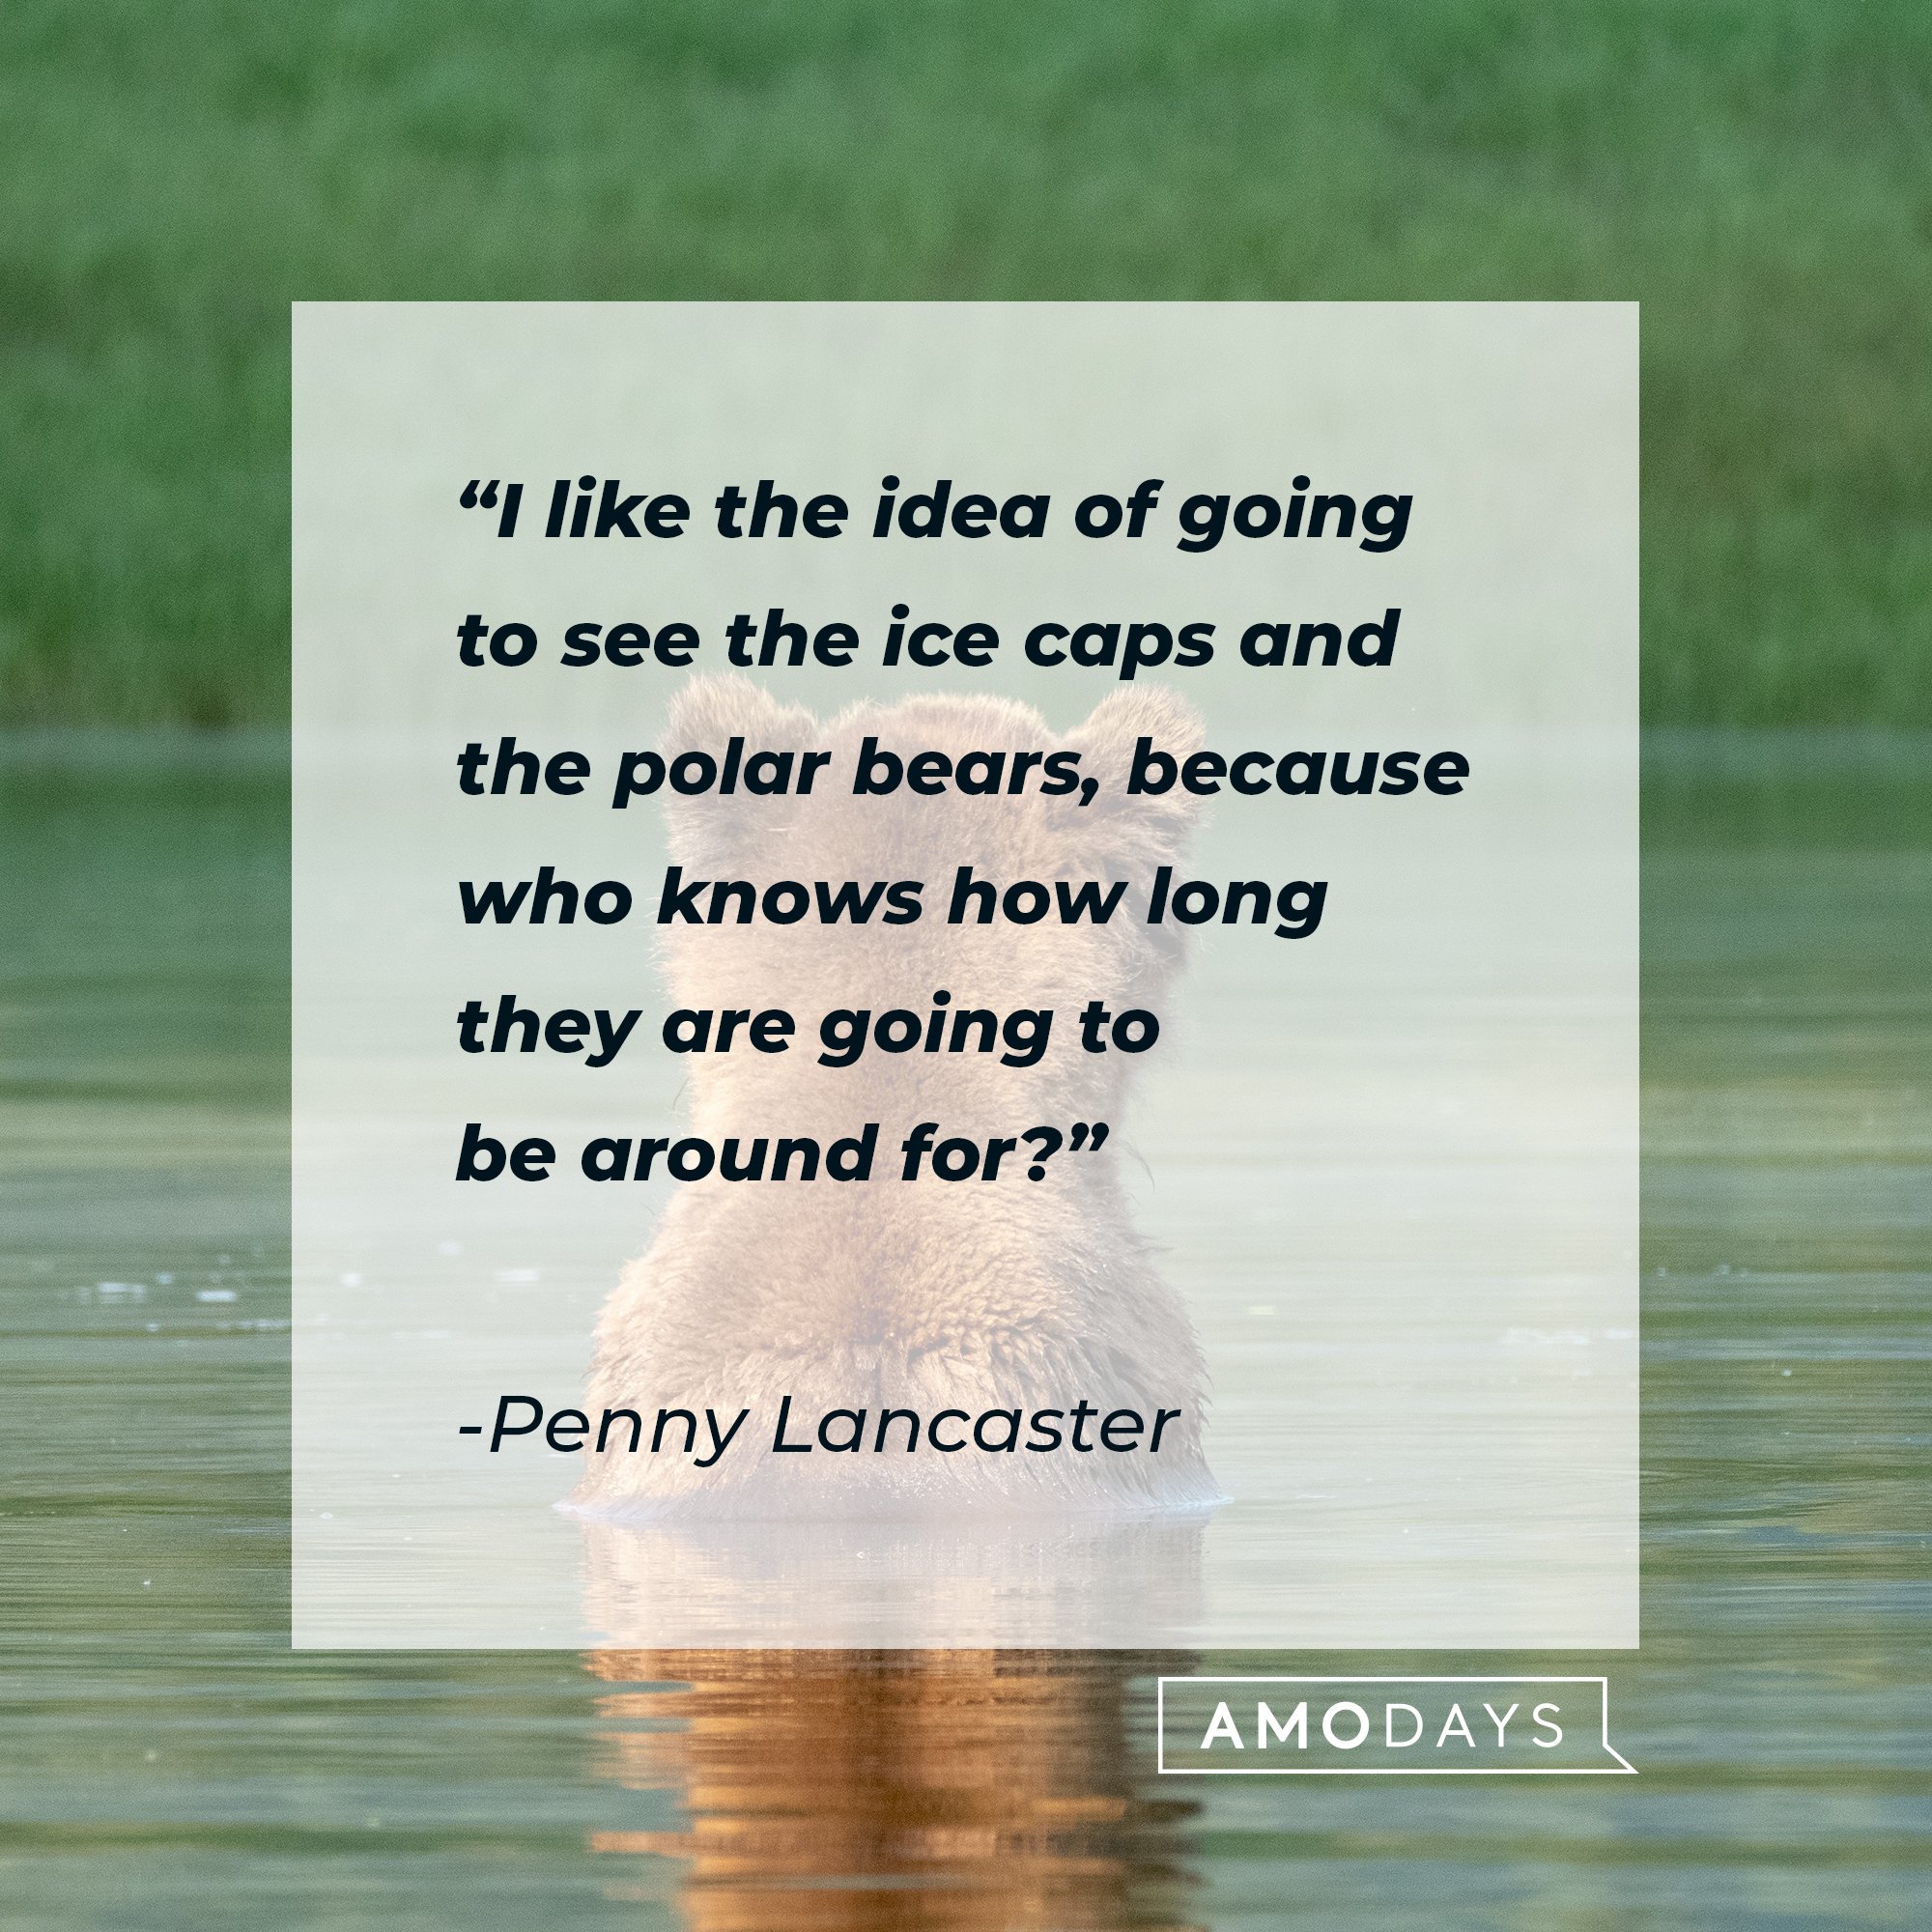 Penny Lancaster’s quote: "I like the idea of going to see the ice caps and the polar bears because who knows how long they are going to be around for?" | Image: AmoDays